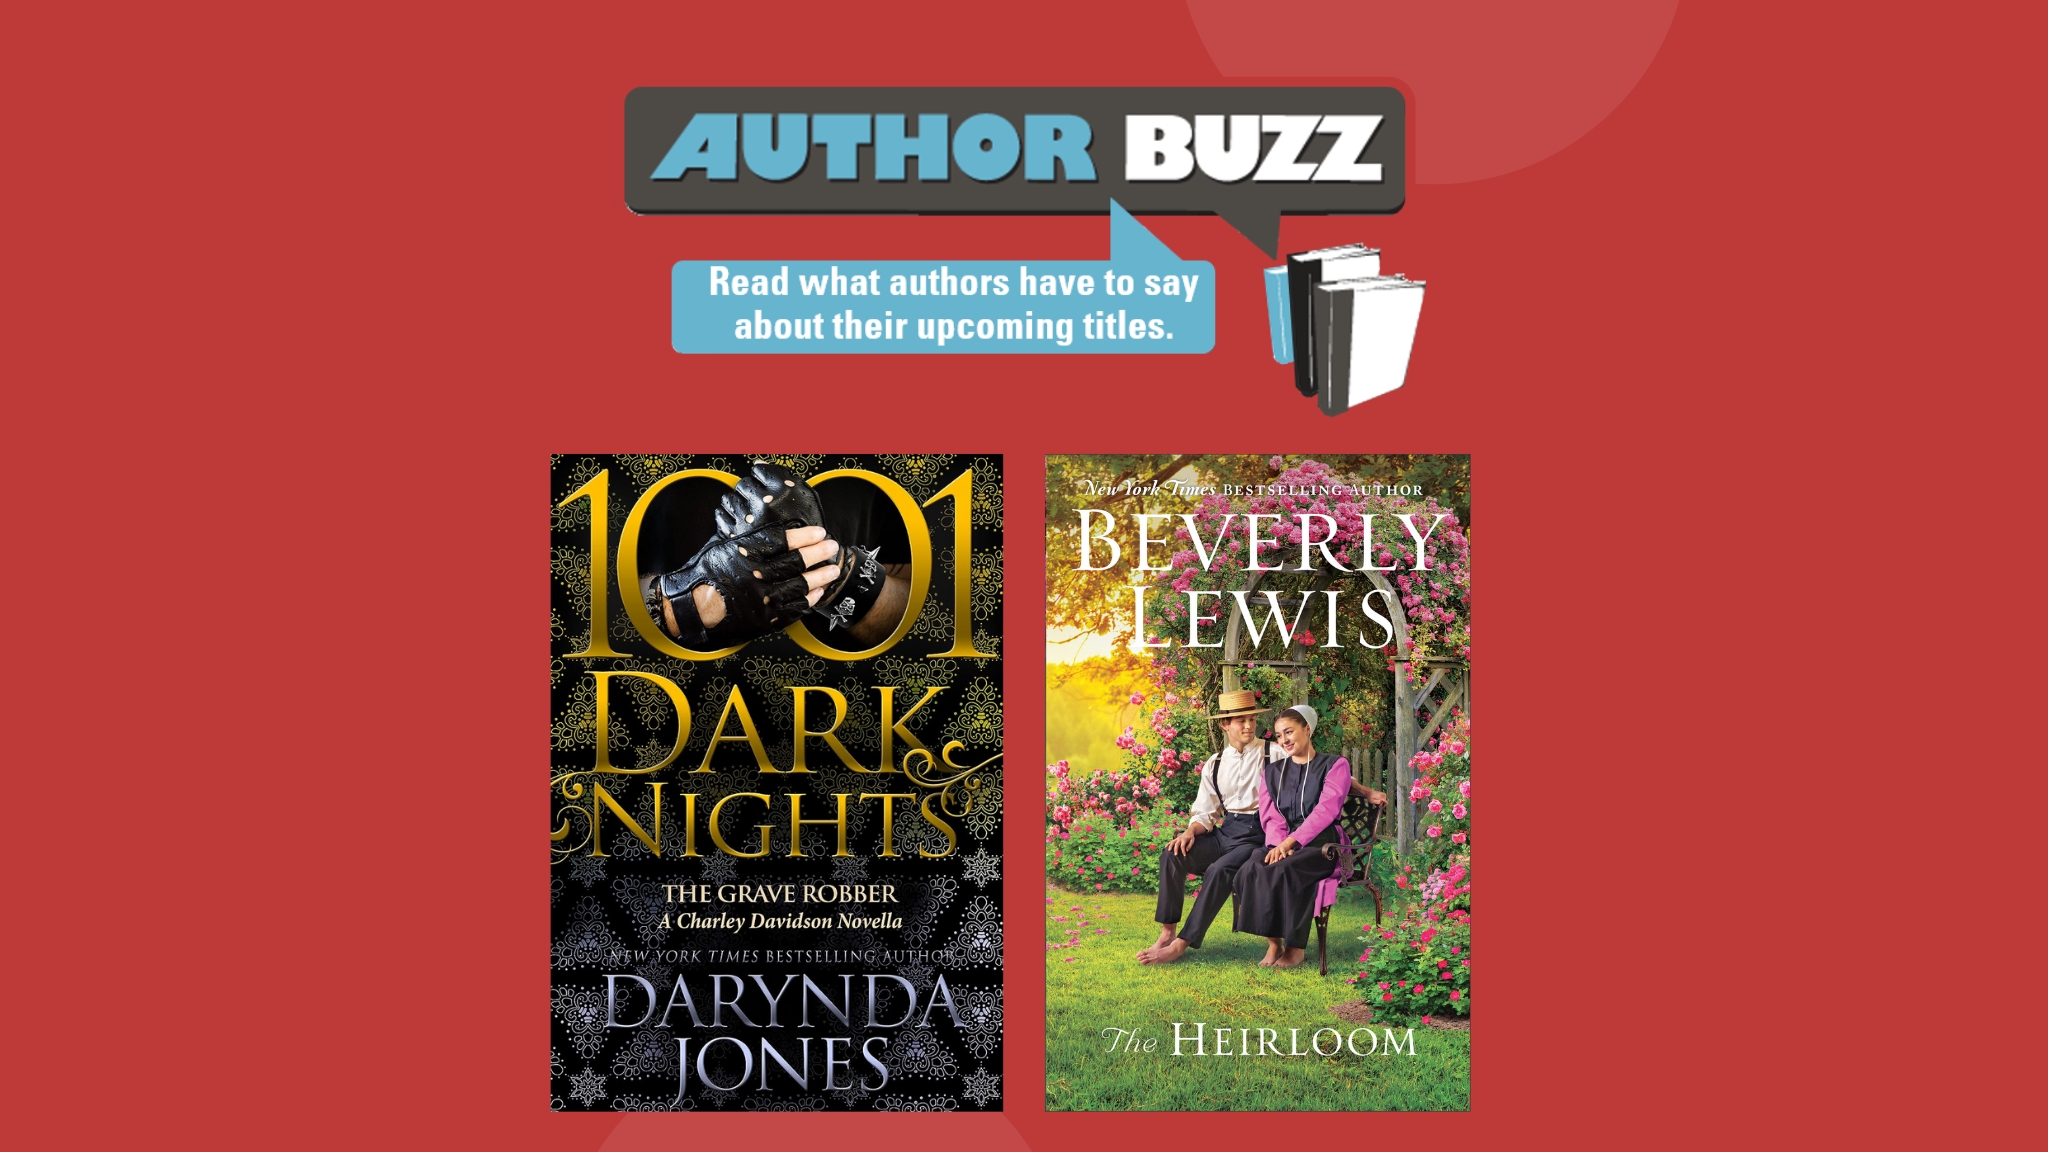 Author Buzz The Grave Robber and The Heirloom